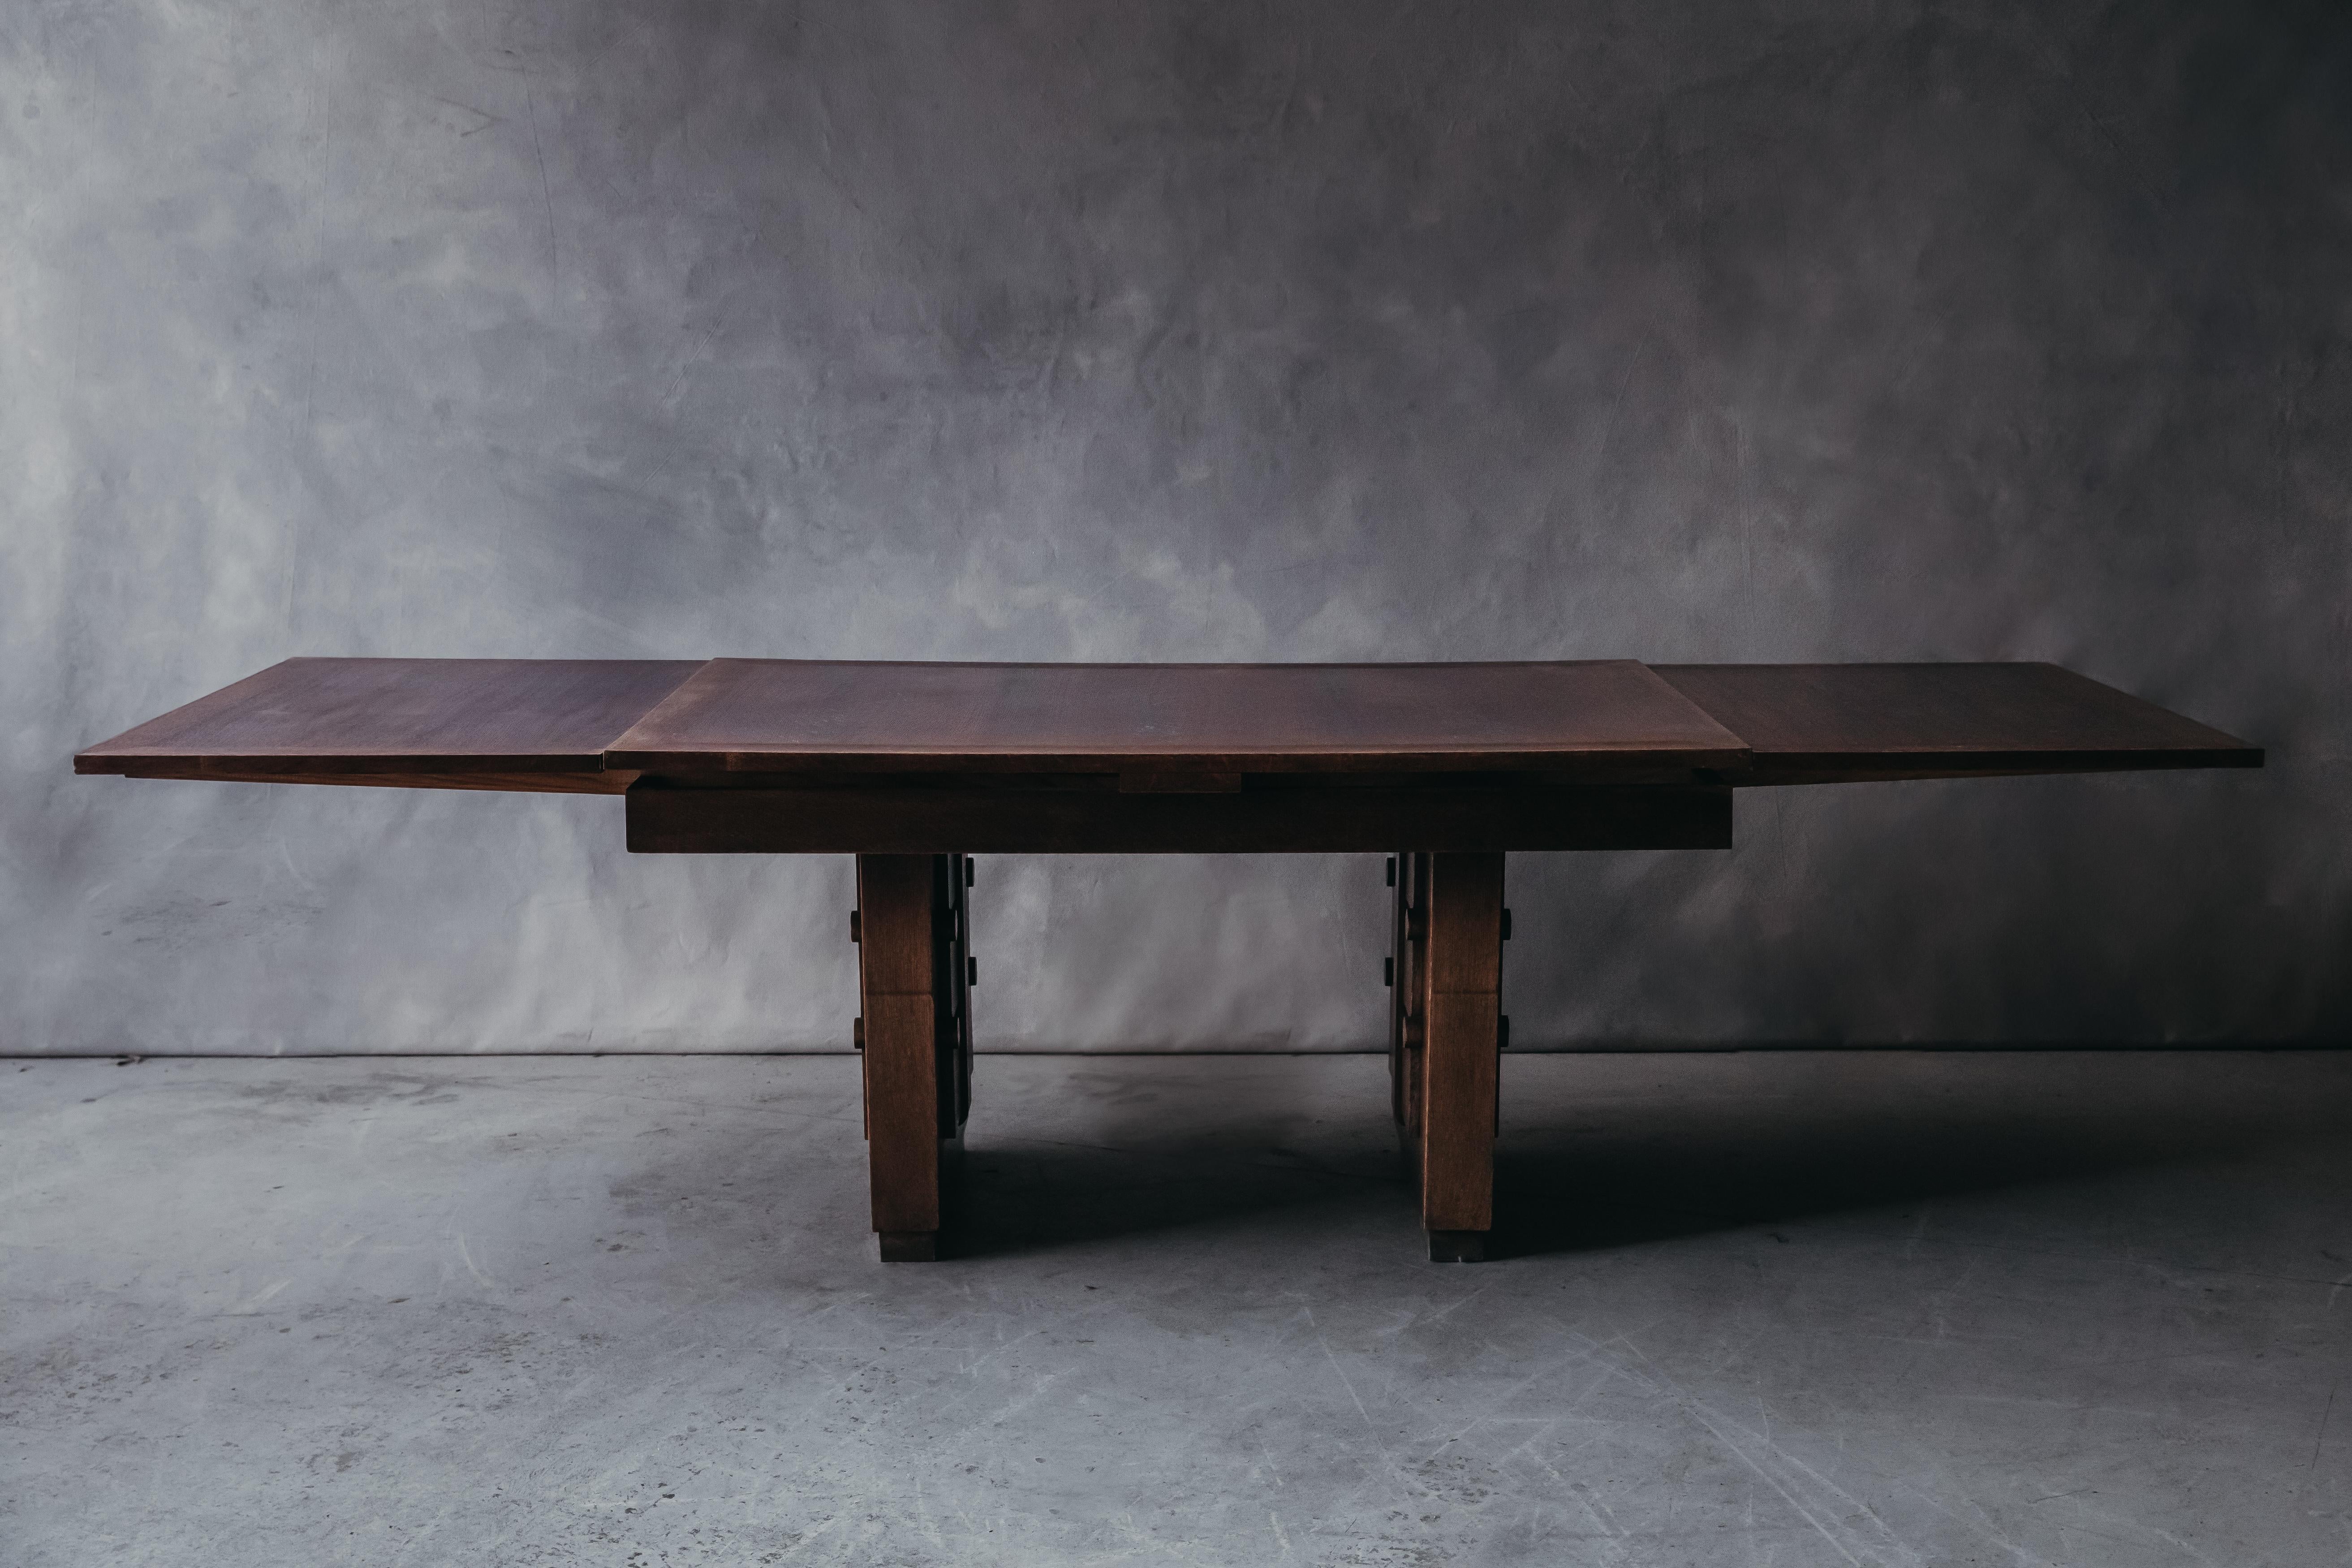 European Vintage Charles Dudouyt Dining Table from France, circa 1940